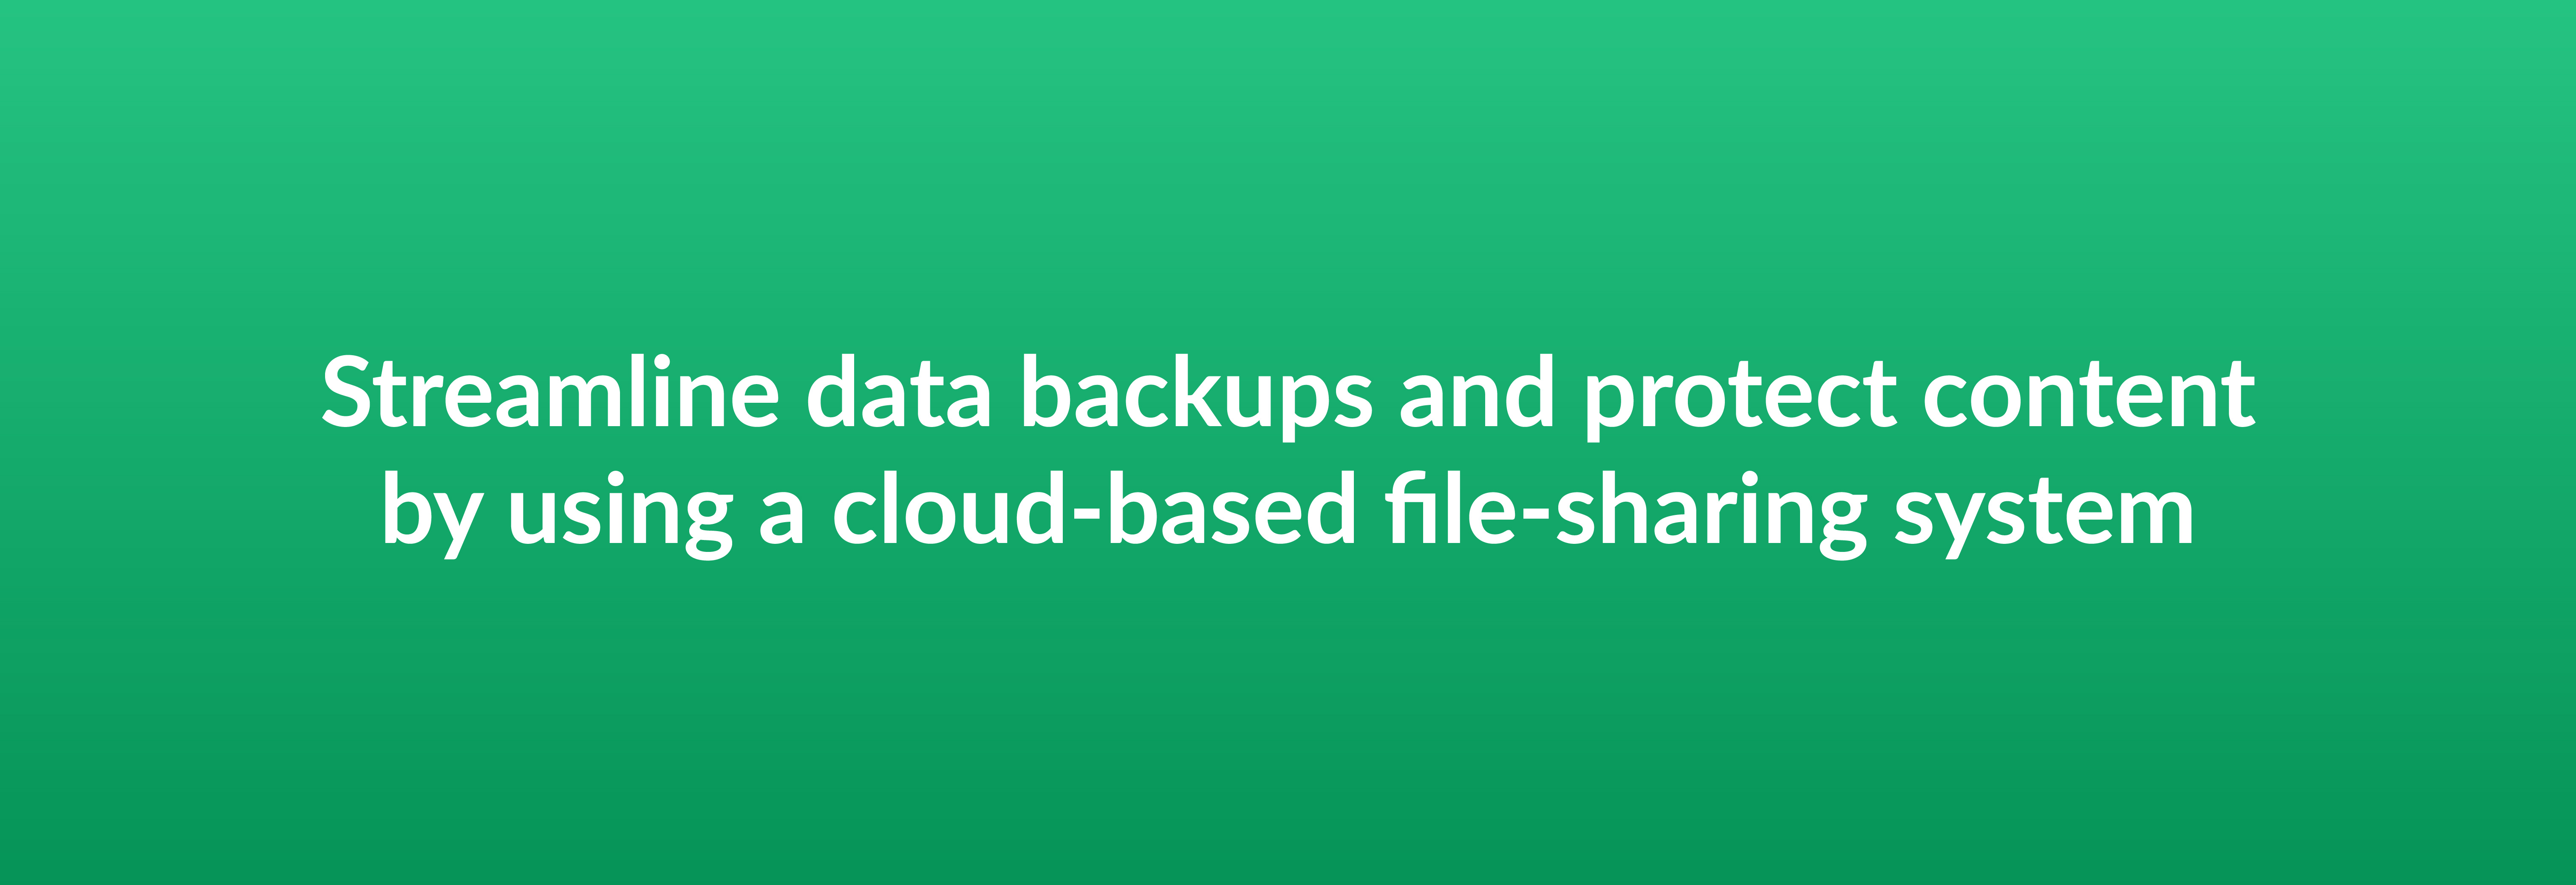 Streamline data backups and protect content by using a cloud-based file-sharing system